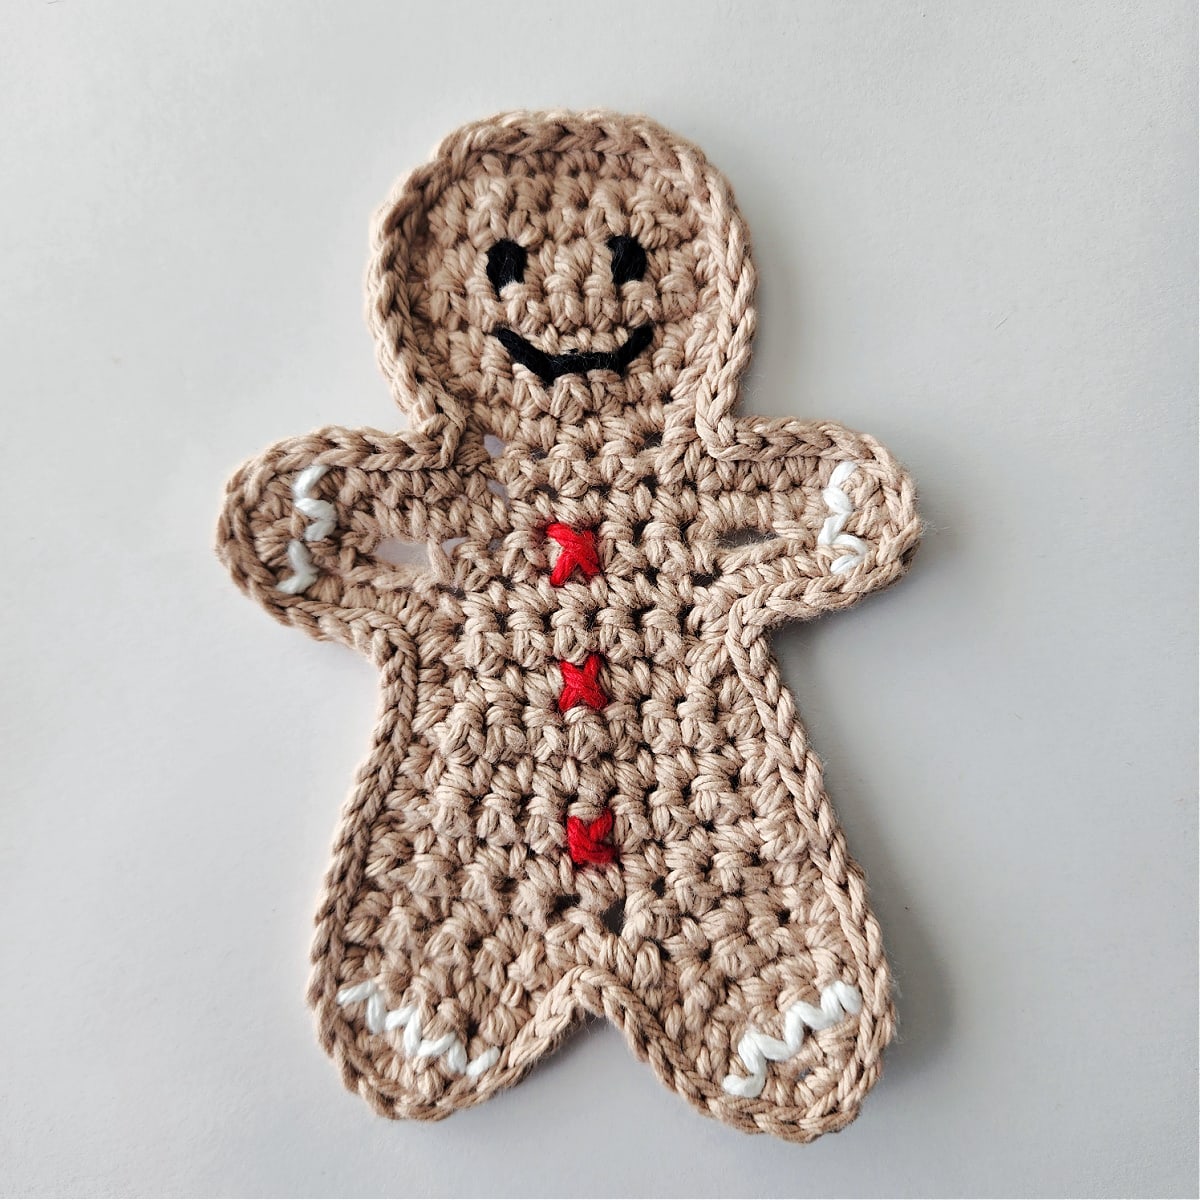 crochet gingerbread man ornament with red buttons, white ric rac trim, and black crochet eyes and mouth